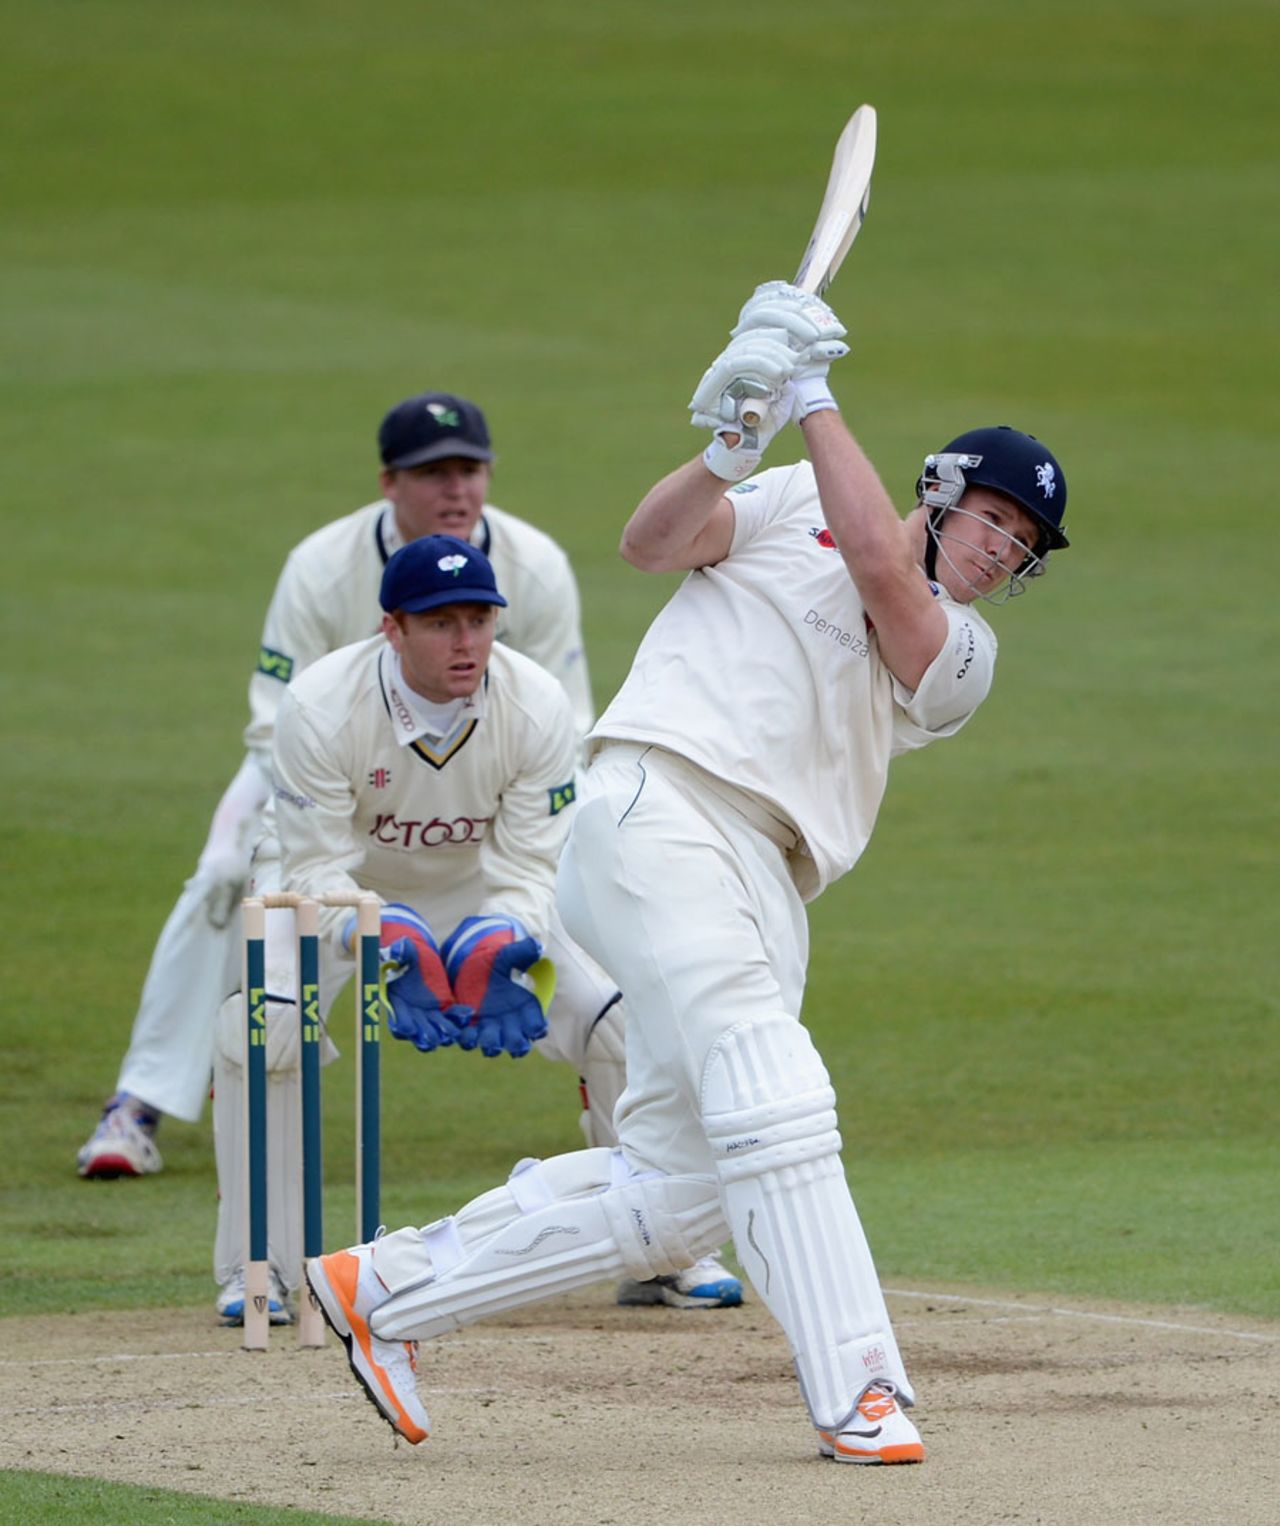 Mat Coles leaves his crease to hit down the ground, Yorkshire v Kent, County Championship, Headingley, 2nd day, April 6, 2012